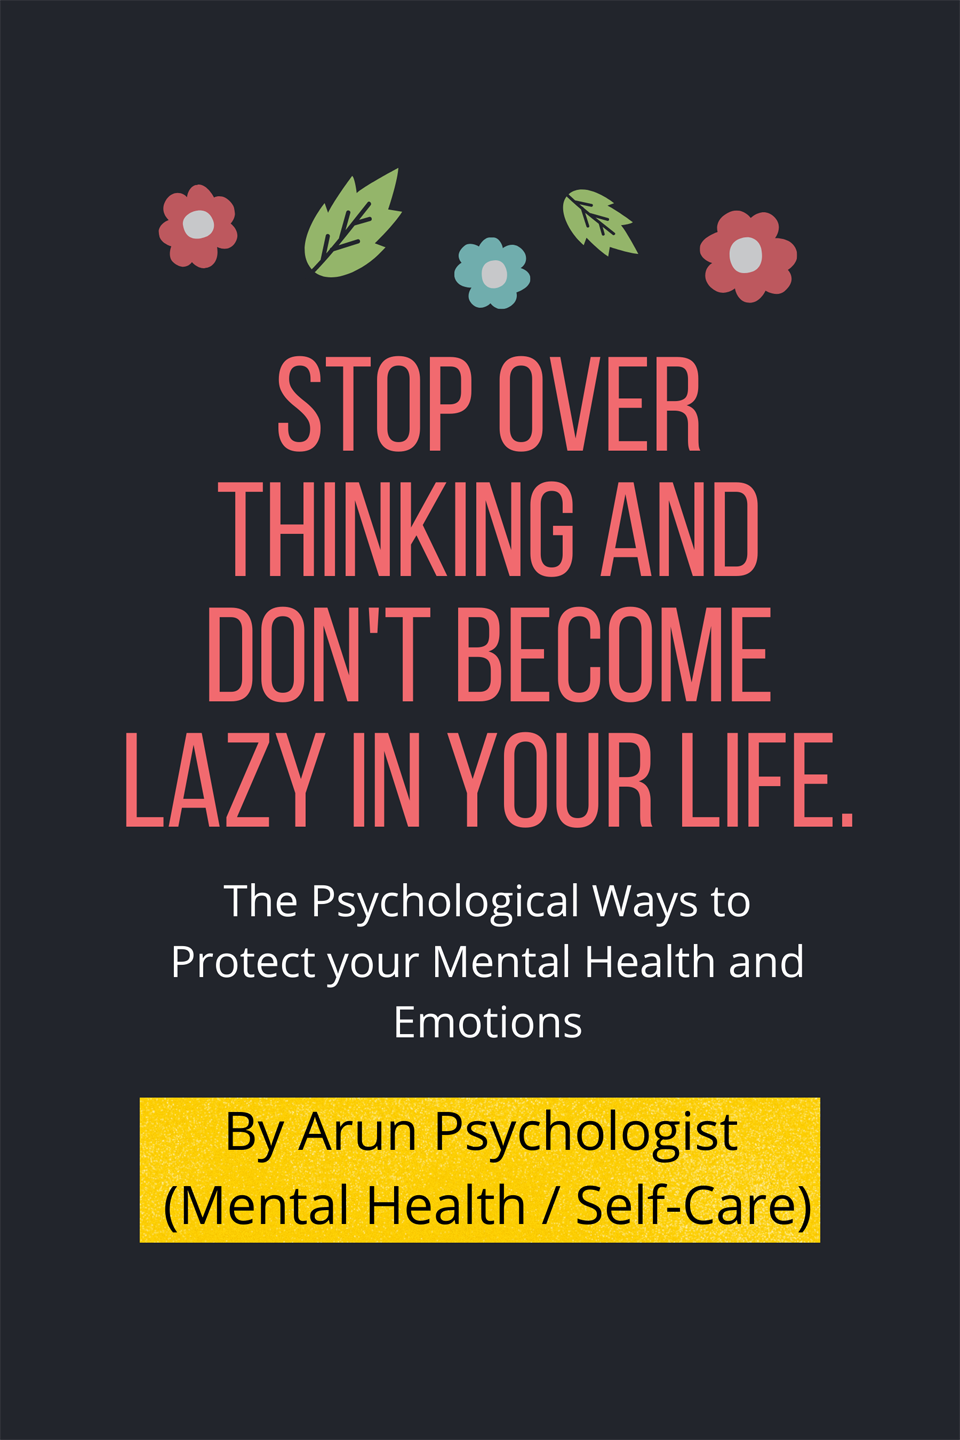 Stop over thinking and don't become lazy in your life The Psychological Ways to Protect your Mental Health and Emotions's Book Image